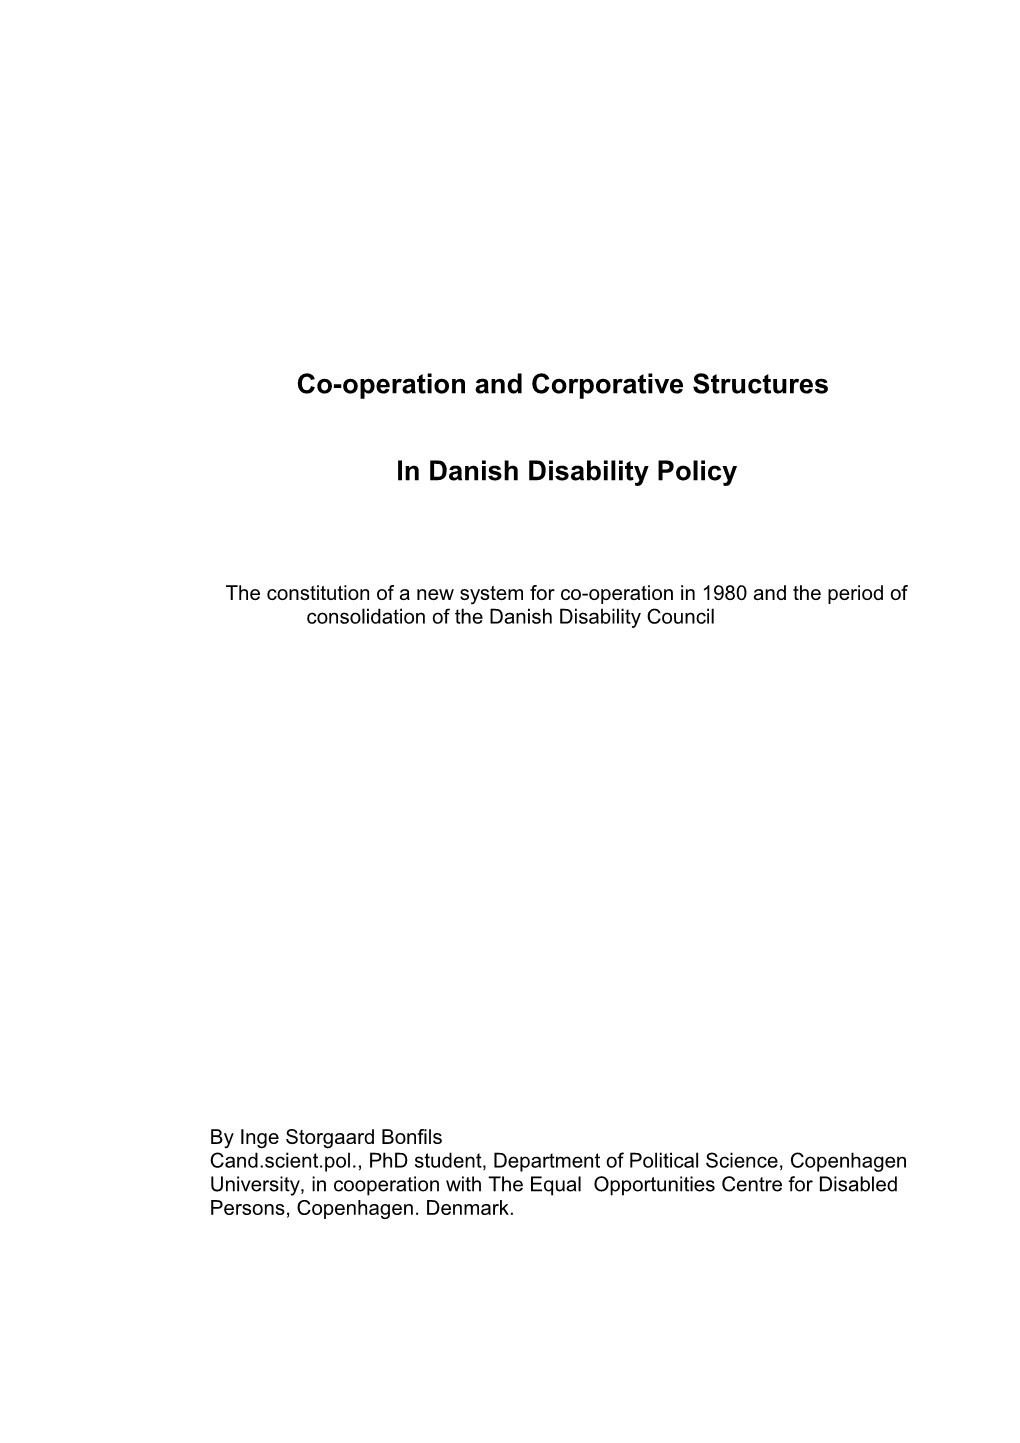 Co -Oporation and Corporative Structures in Danish Disability Policy